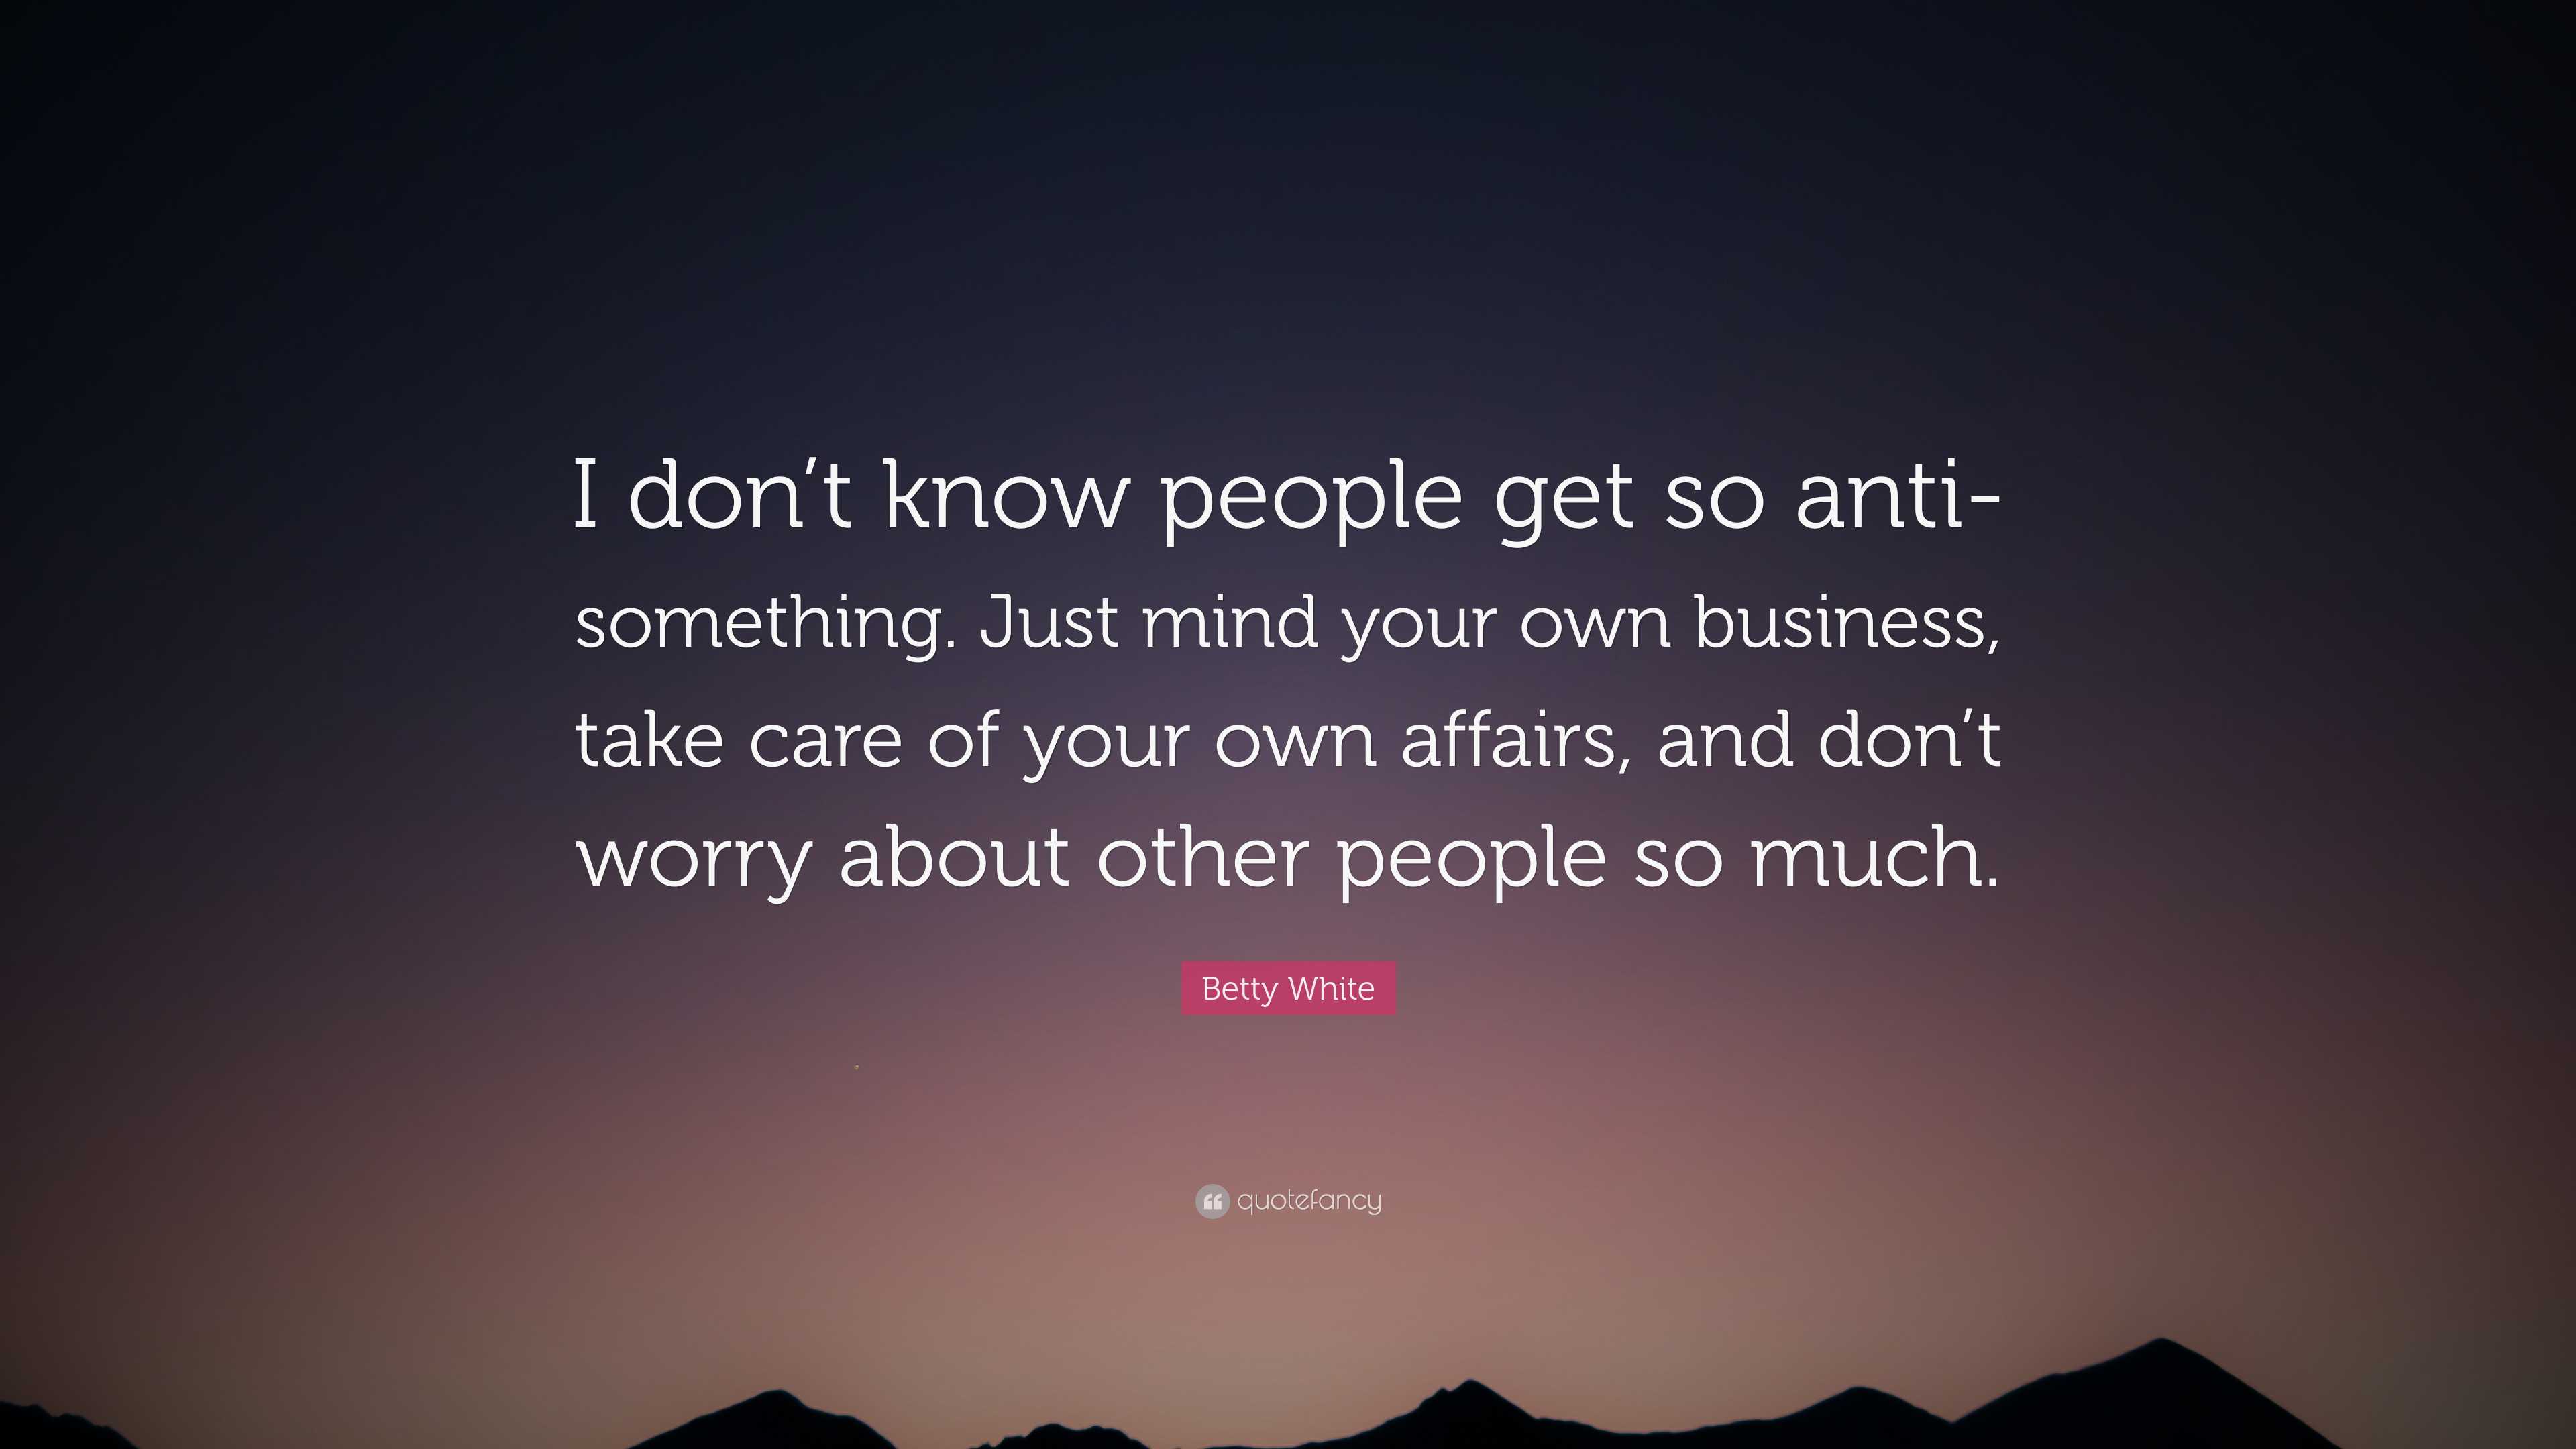 Betty White Quote: “I don’t know people get so anti-something. Just ...